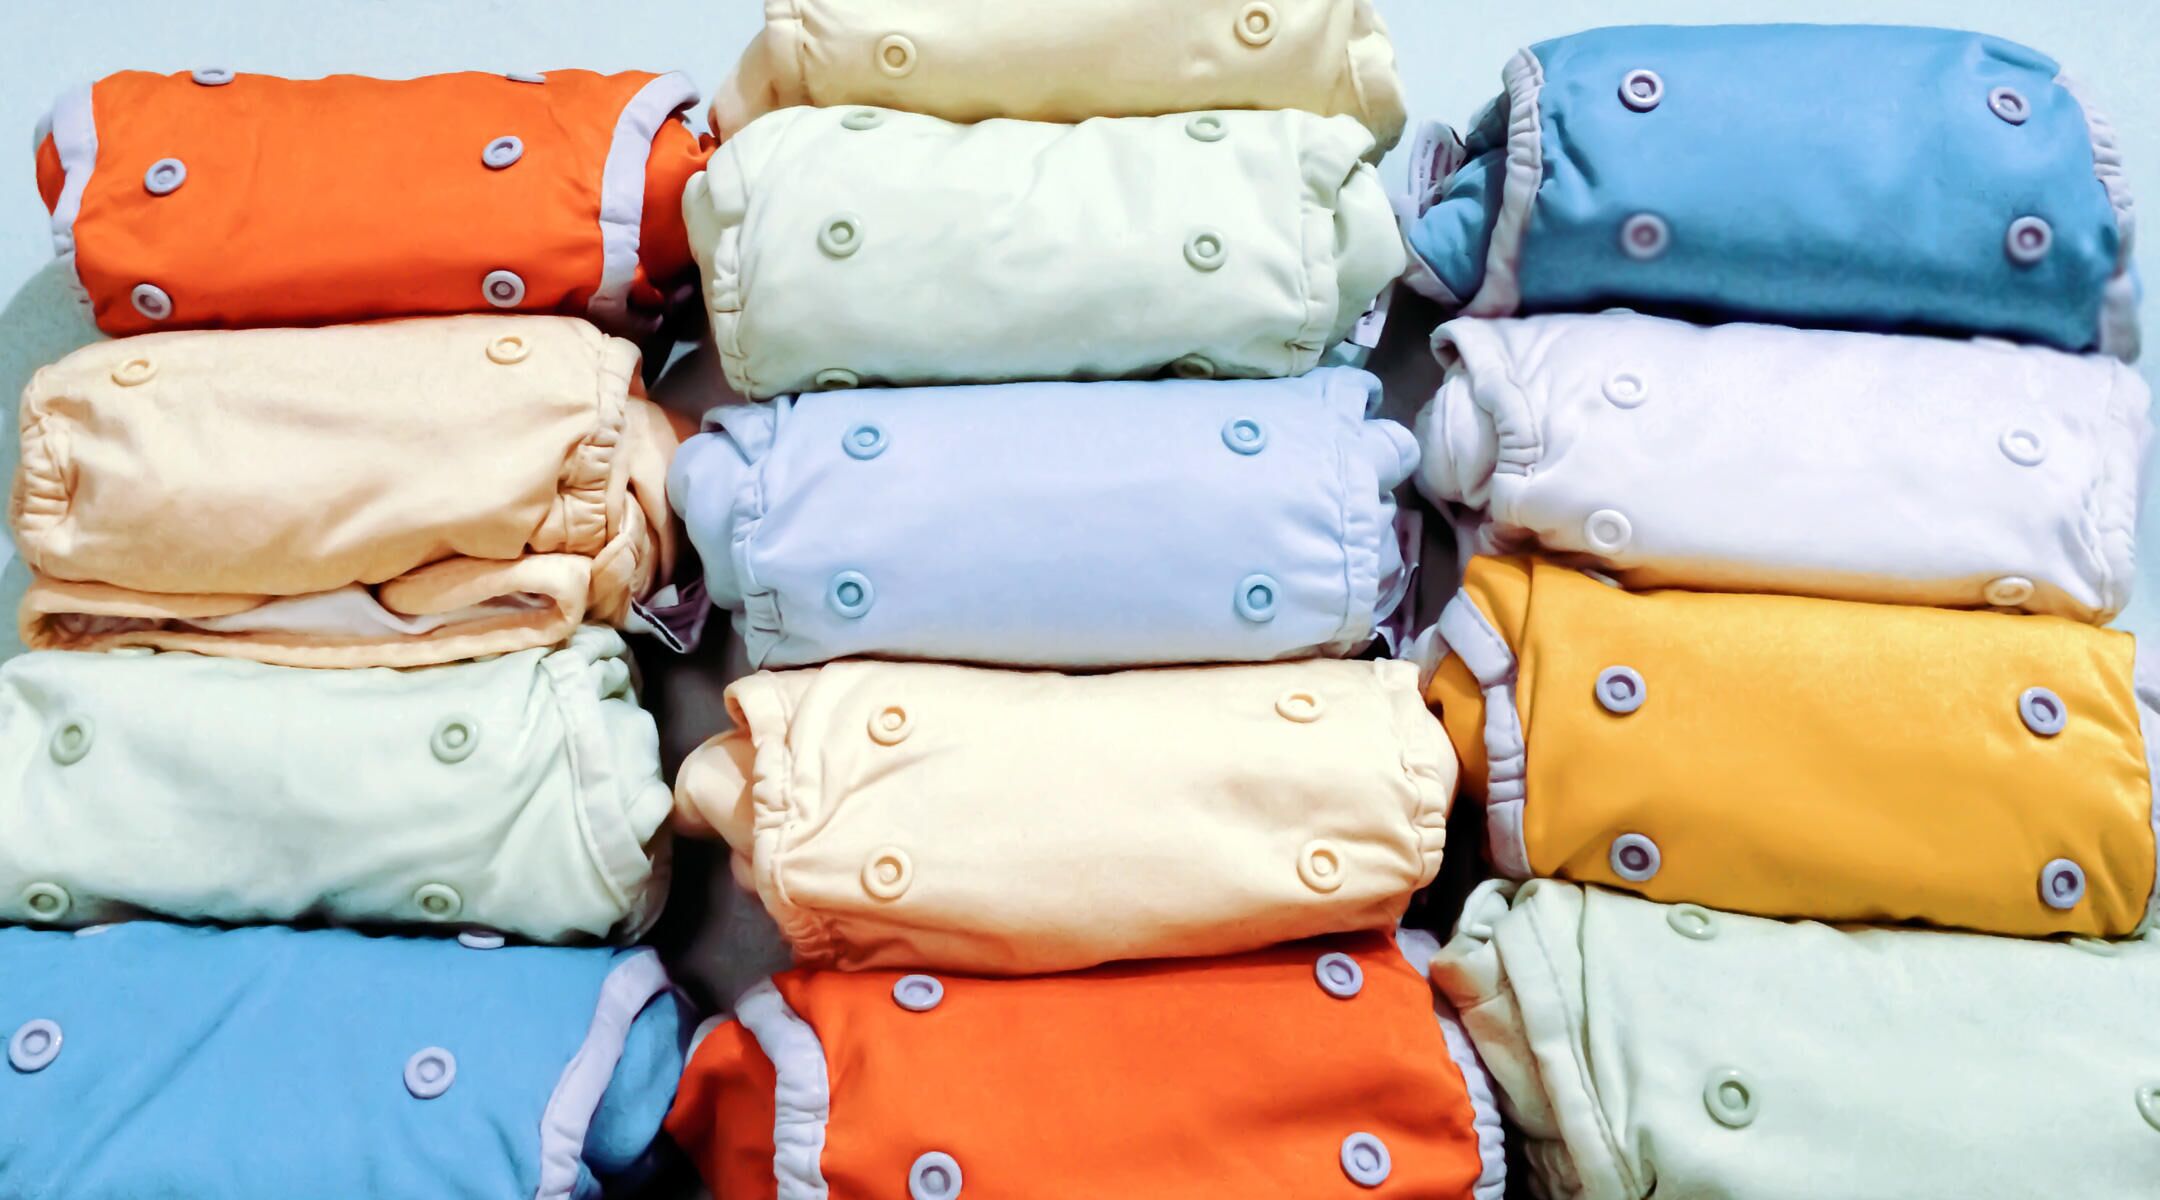 cloth-diapers-101-how-to-use-cloth-diapers